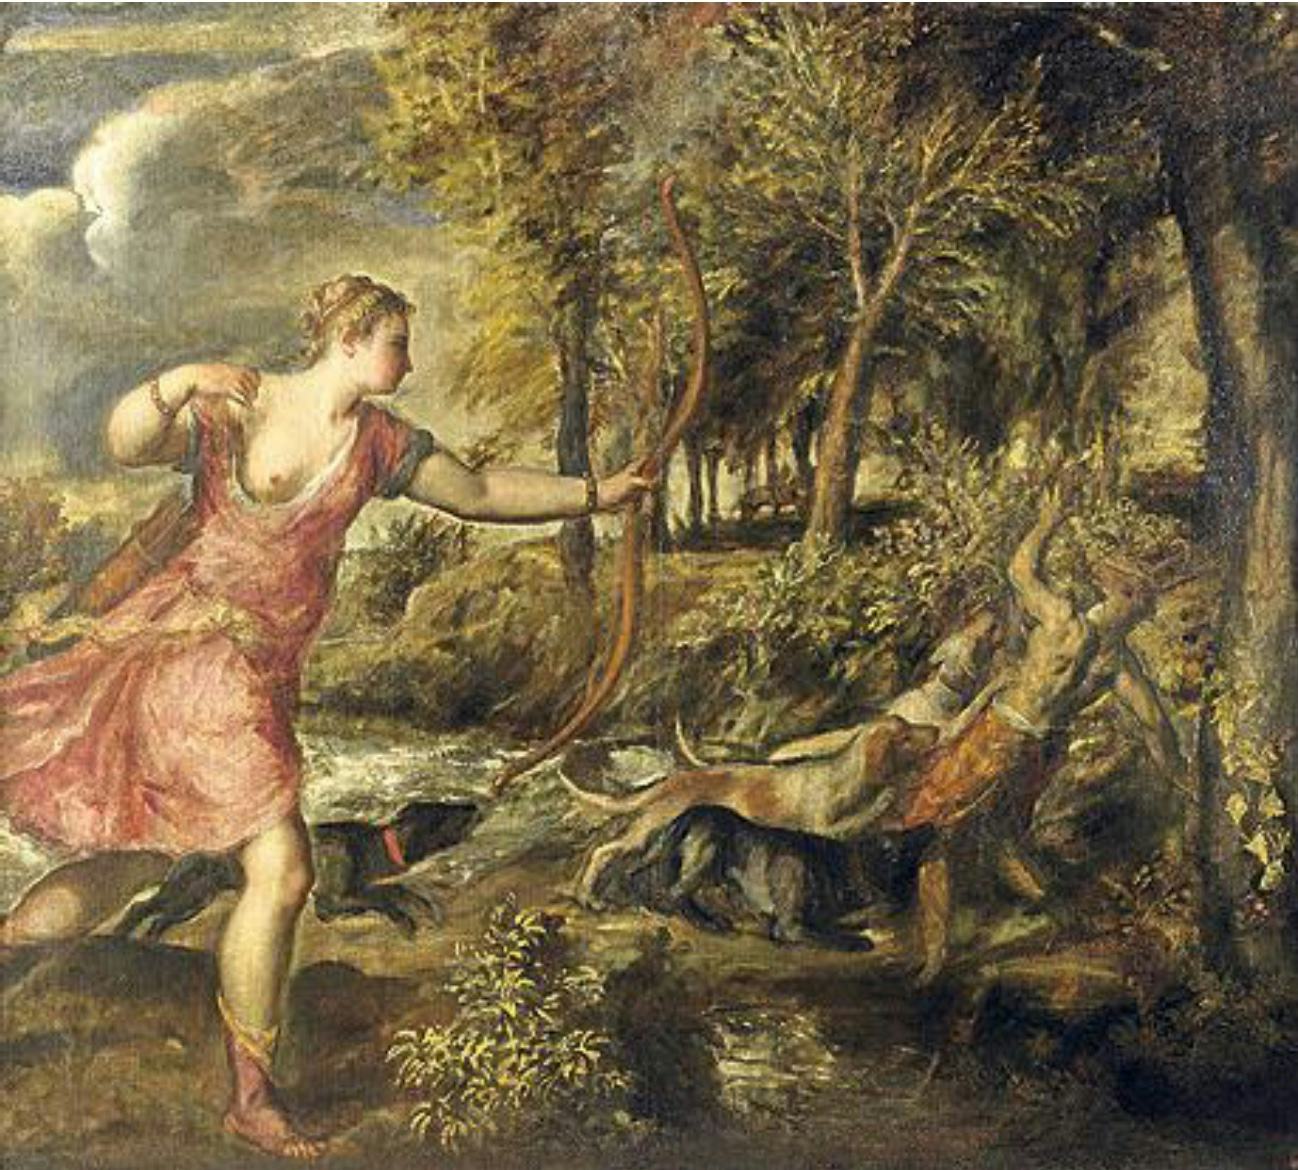 The Death of Actaeon, Titian, c. 1559-1575